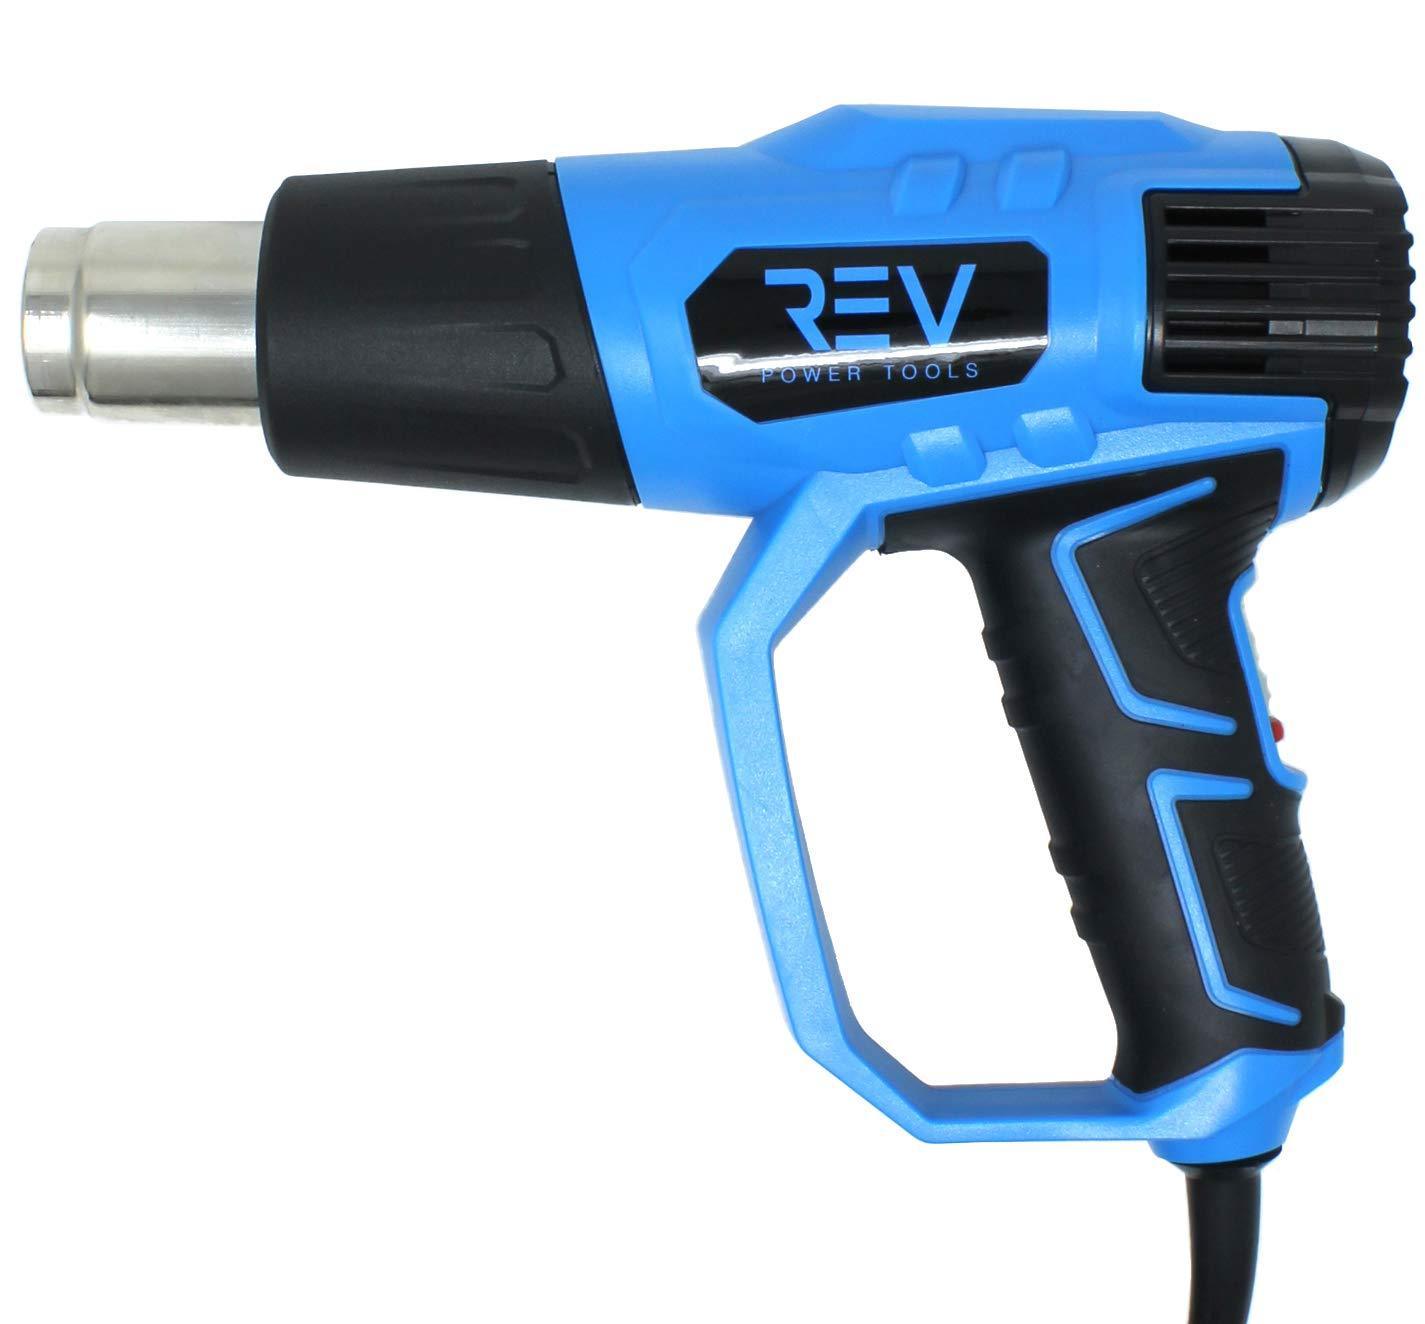 What is the best heat gun for heat shrink tubing?